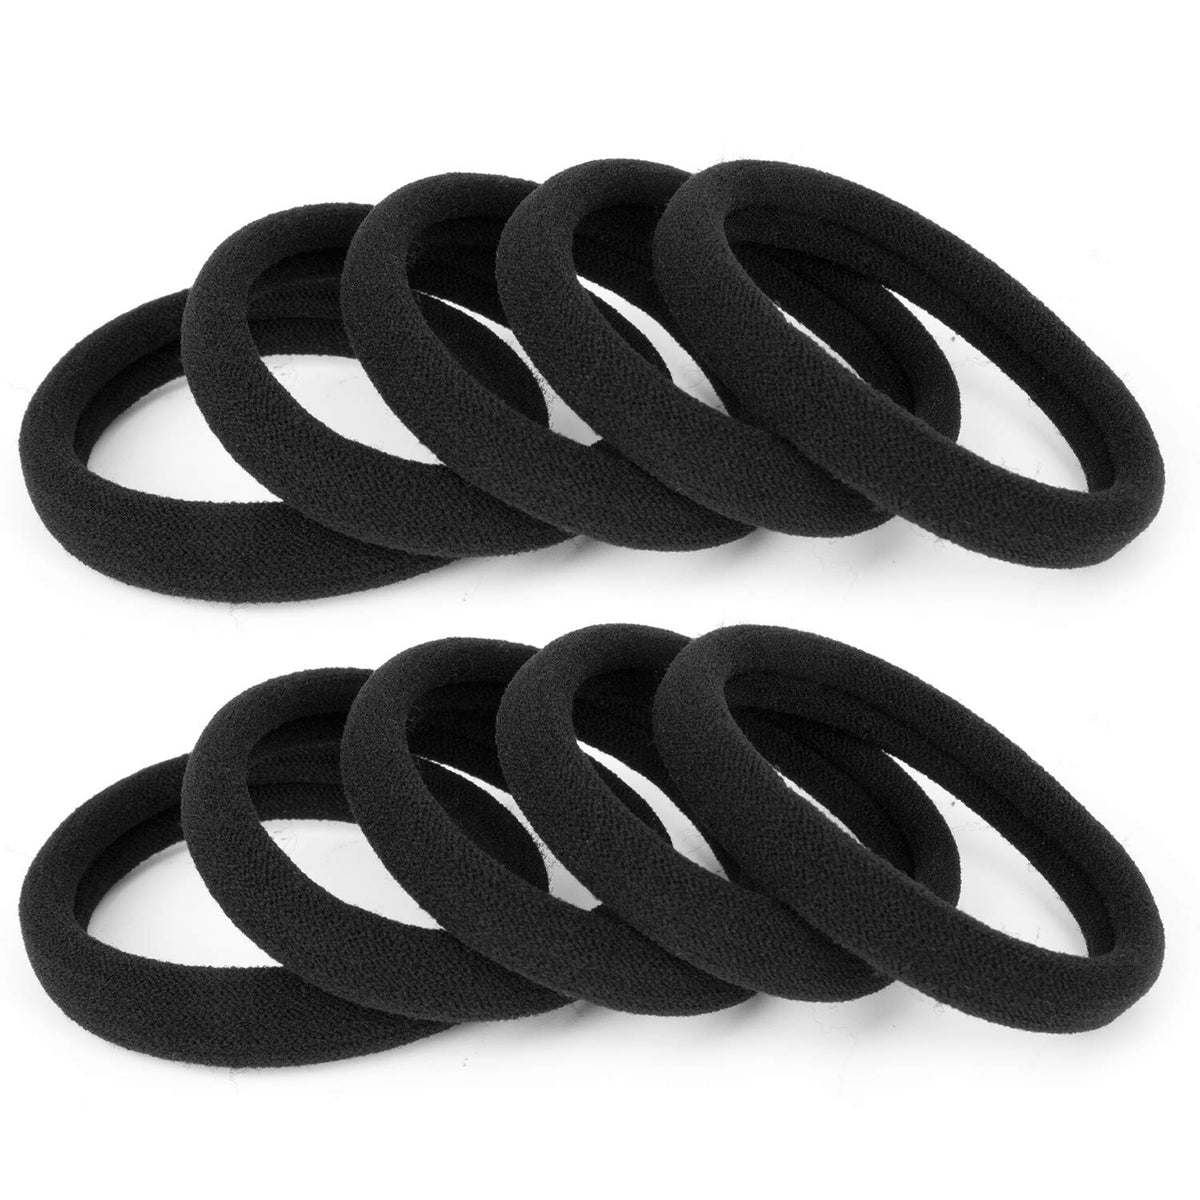 Black Hair Ties Band – Thick Cotton Seamless Ponytail Holders – Hair Elastics Hair Bands for Thick Heavy and Curly Hair